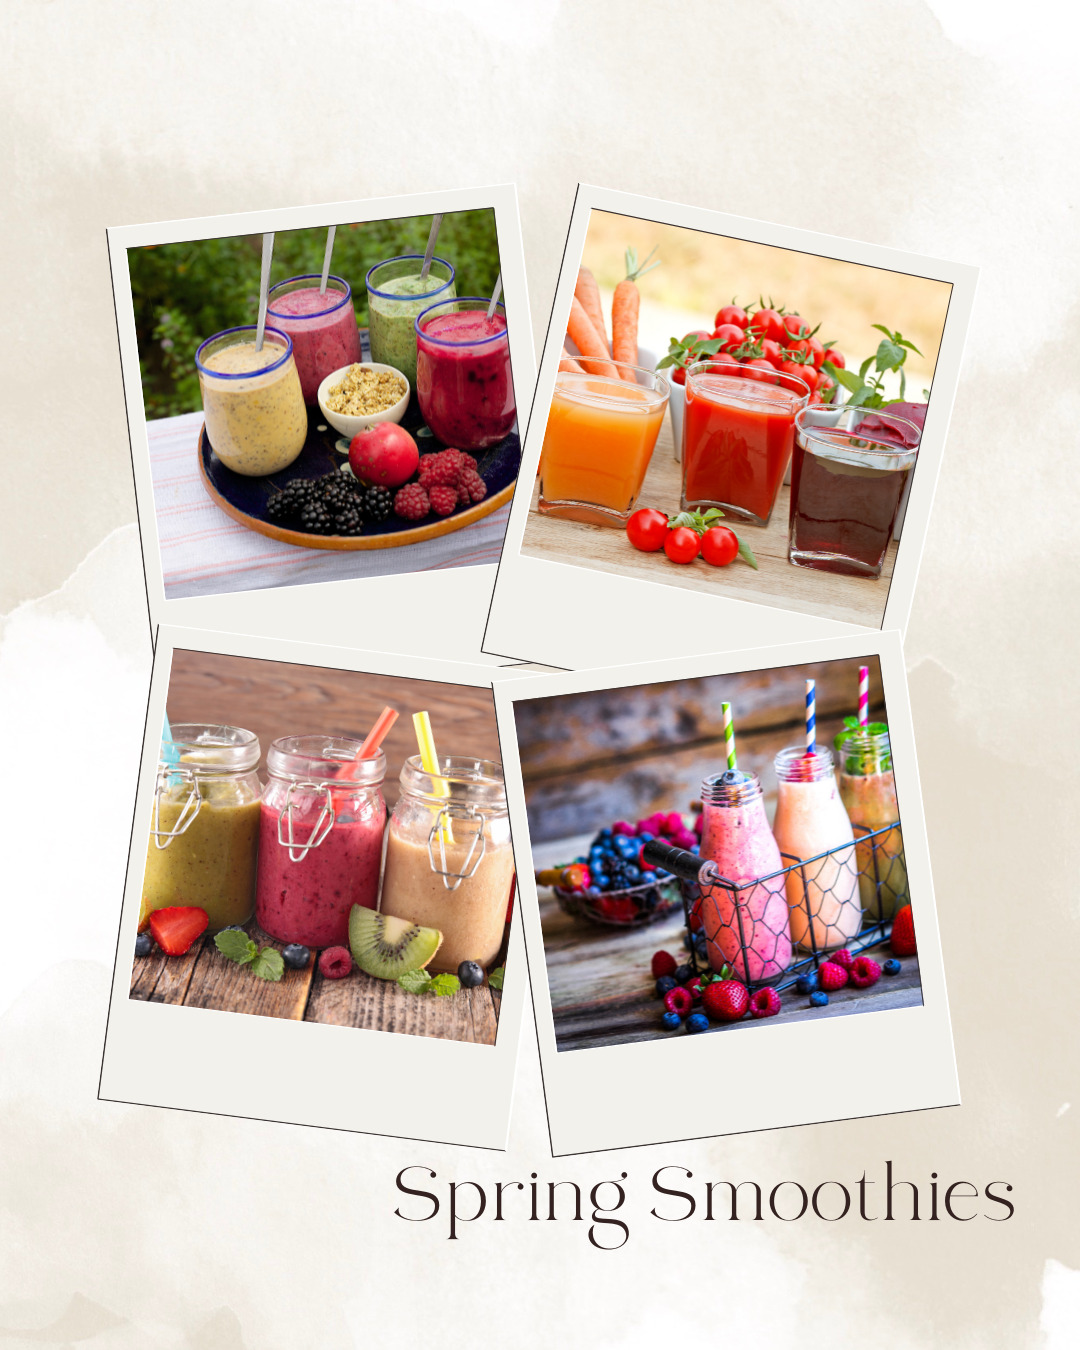 Fresh smoothies pictures in a collage